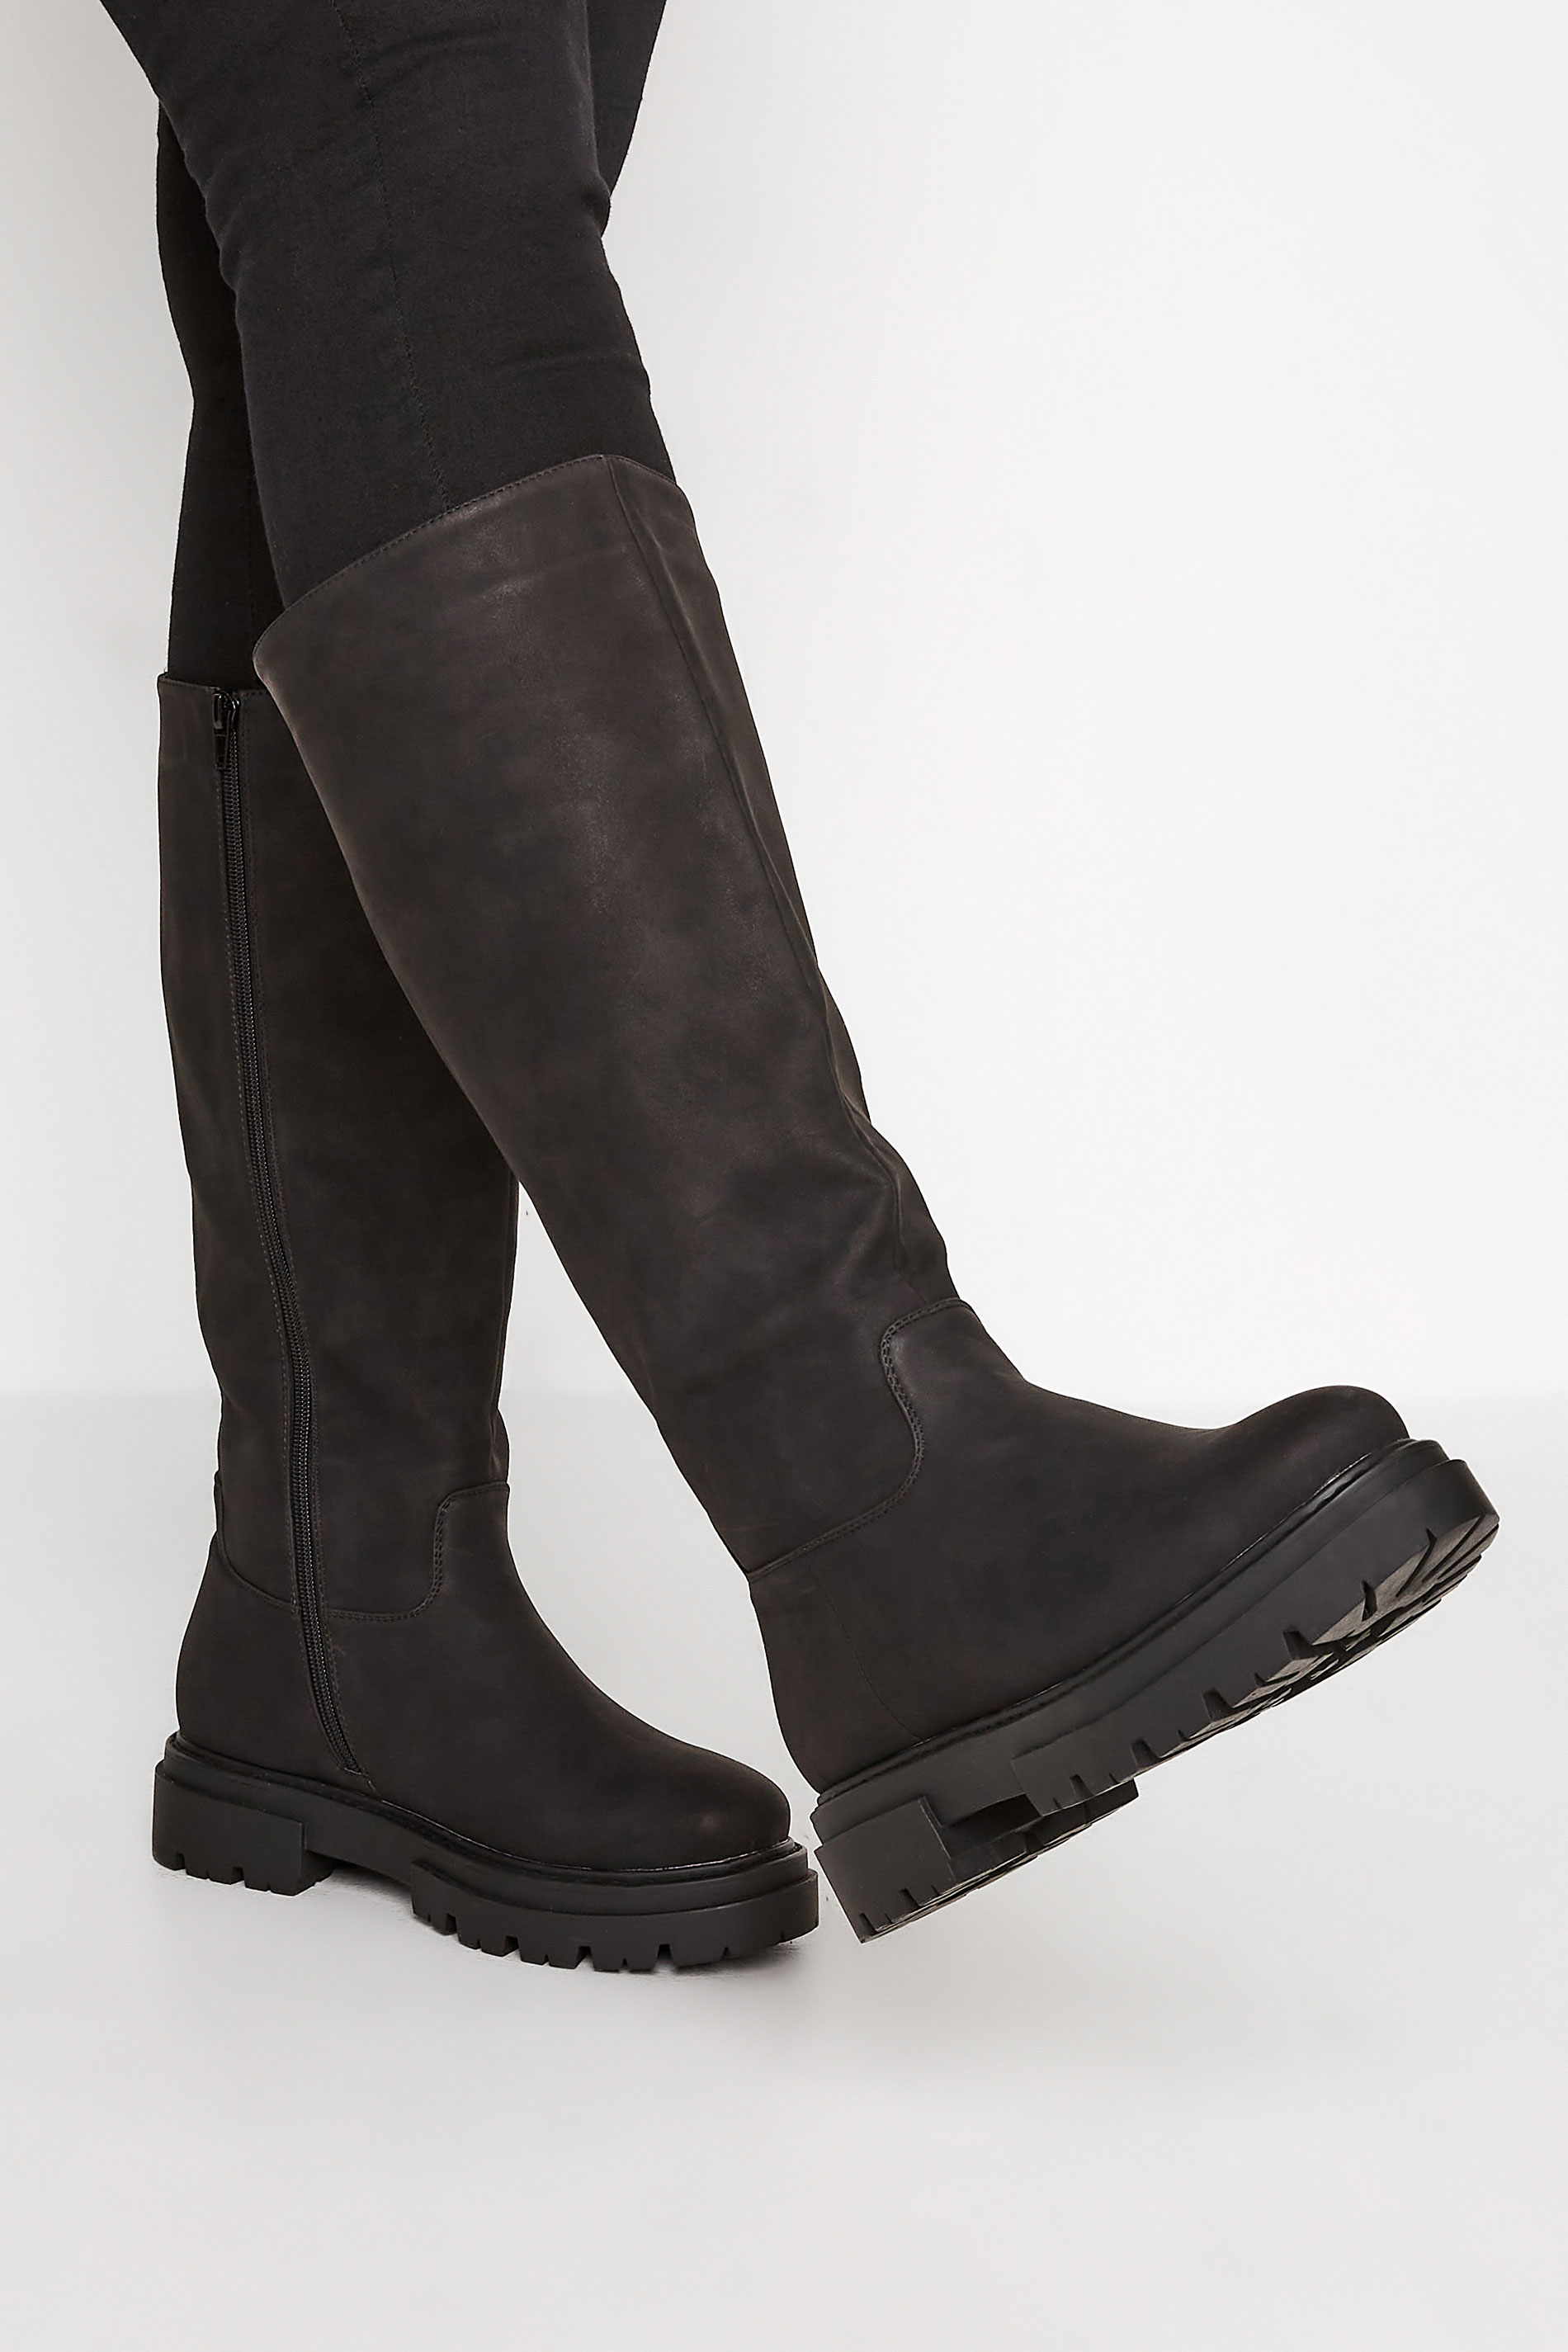 LIMITED COLLECTION Black Chunky Calf Boots In Extra Wide EEE Fit 1